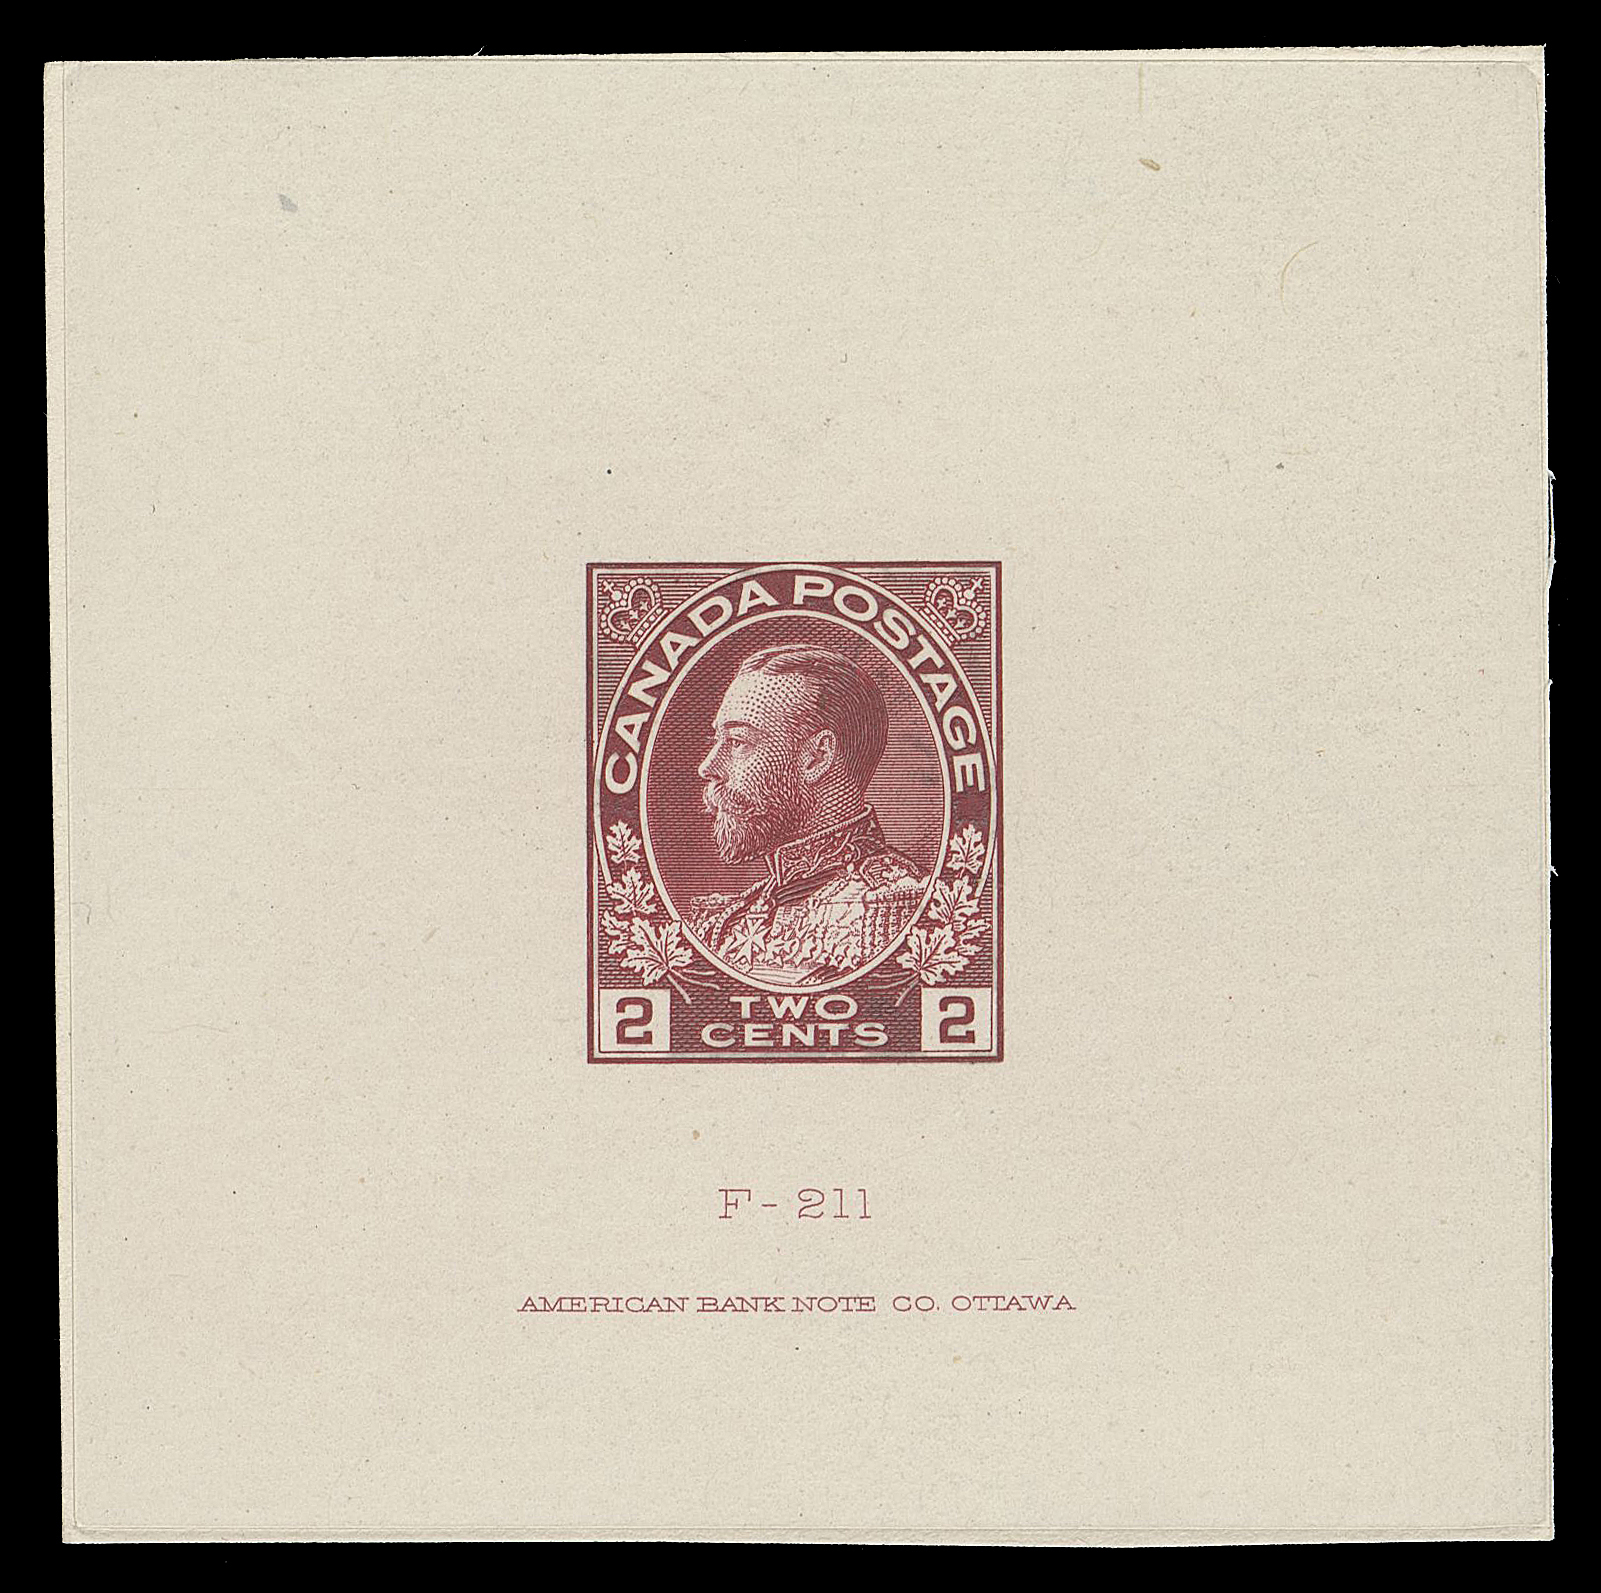 ADMIRAL PROOFS  106,Die Proof in the original issued colour on india paper 62 x 62mm, die sunk on nearly same-size card showing sinkage area on all sides; the hardened die with die number "F-211" and ABNC imprint (23.5mm long). In choice condition and very scarce, VF+ (Minuse & Pratt 106 A P1a, Original Die)